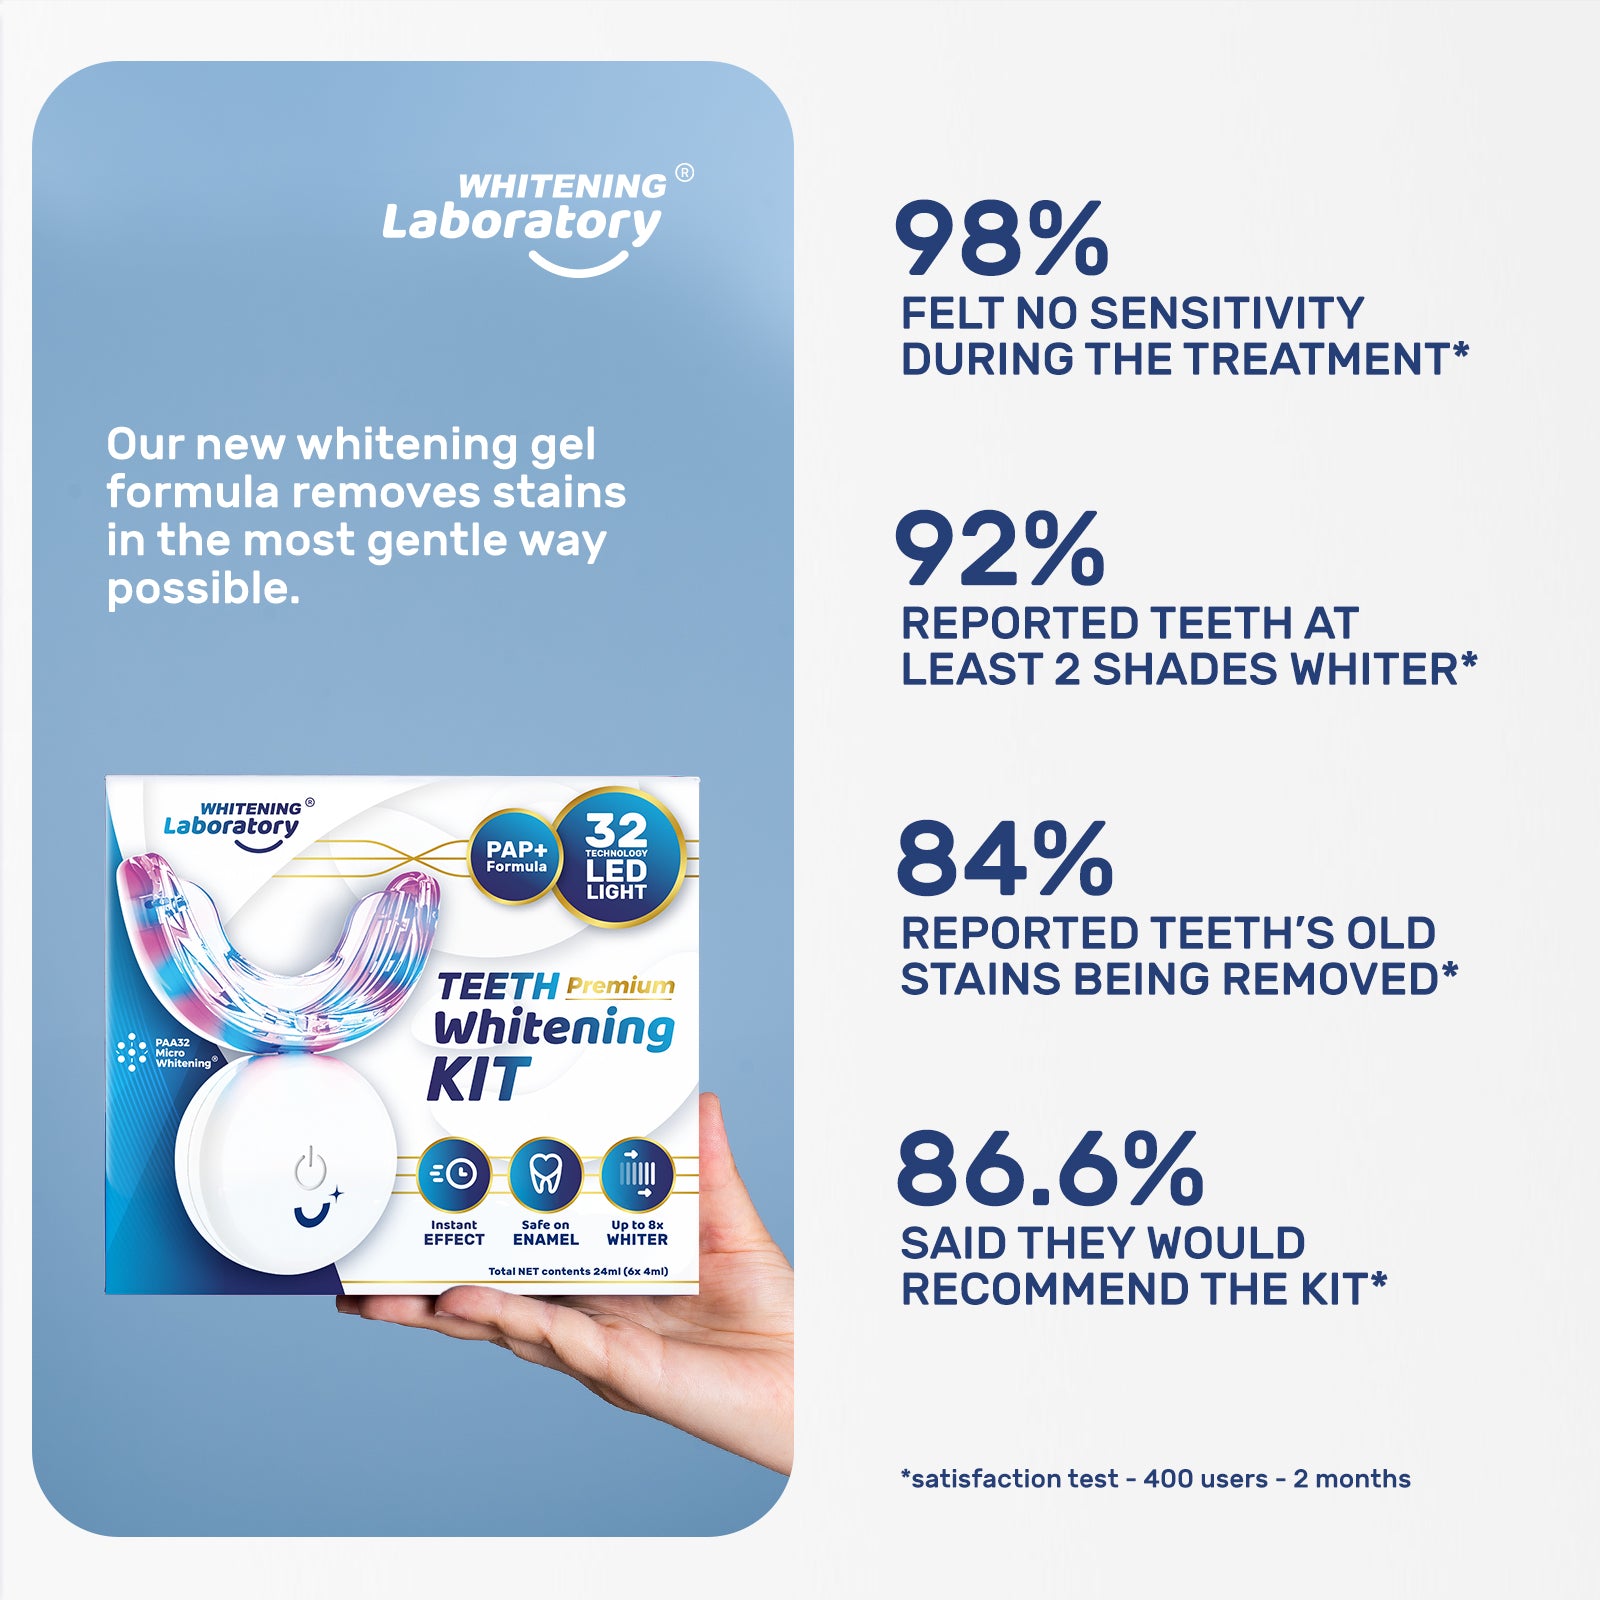 Hand holding Whitening Laboratory's Teeth Whitening Kit packaging, displaying user satisfaction statistics with high success rates for no sensitivity and improved whiteness.